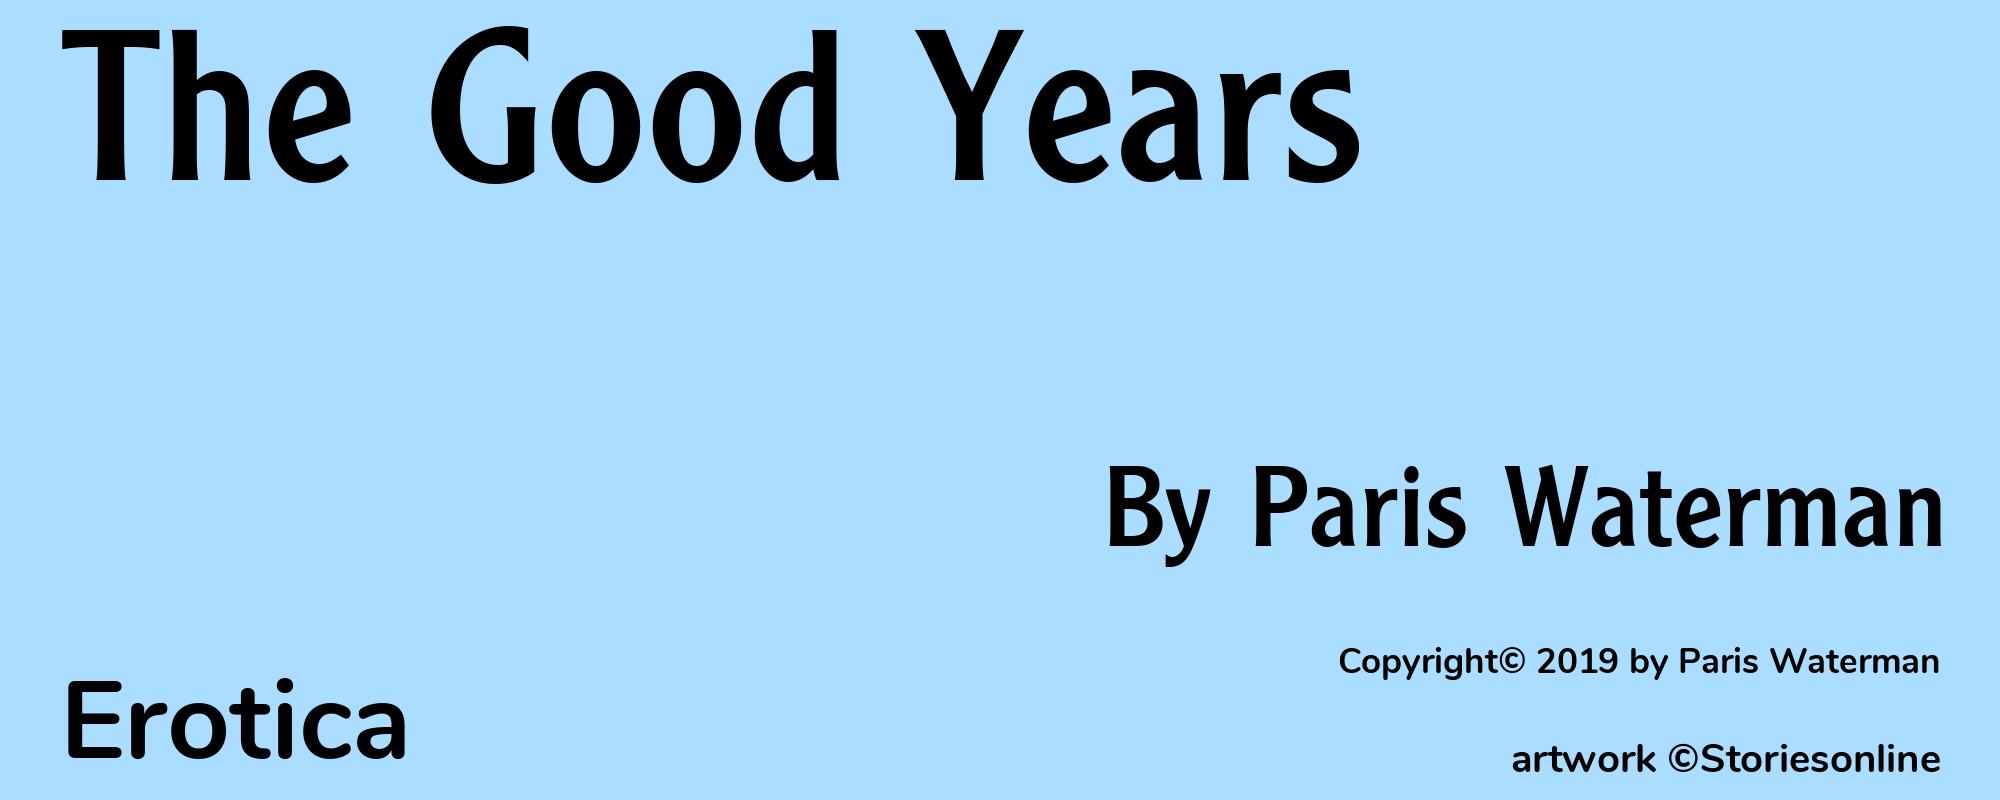 The Good Years - Cover